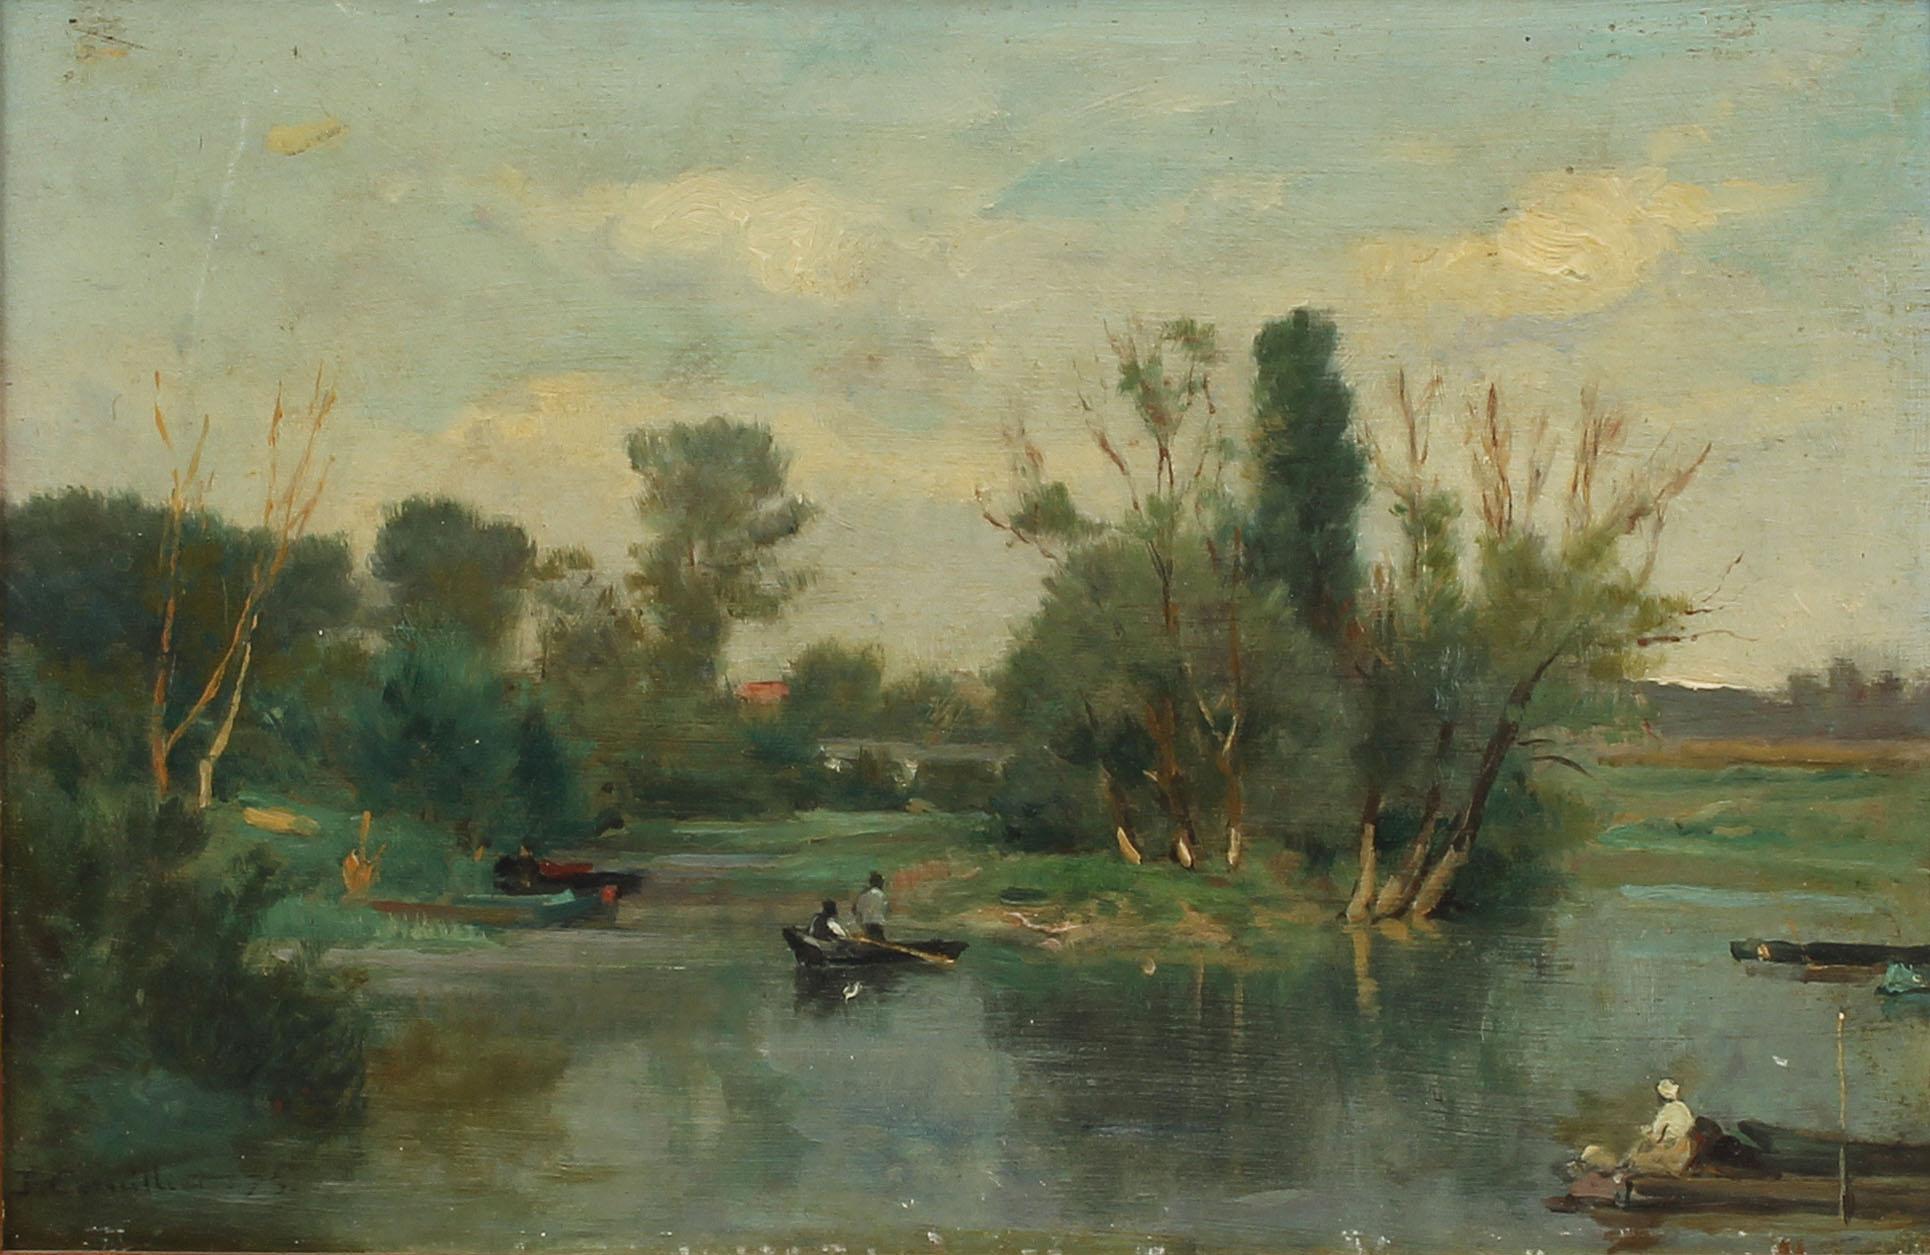 Antique Barbizon school impressionist lake scene oil painting by Jules Cornilliet (1830 - 1886).  Oil on board, circa 1975. Signed.  Displayed in a giltwood frame.  Image, 9